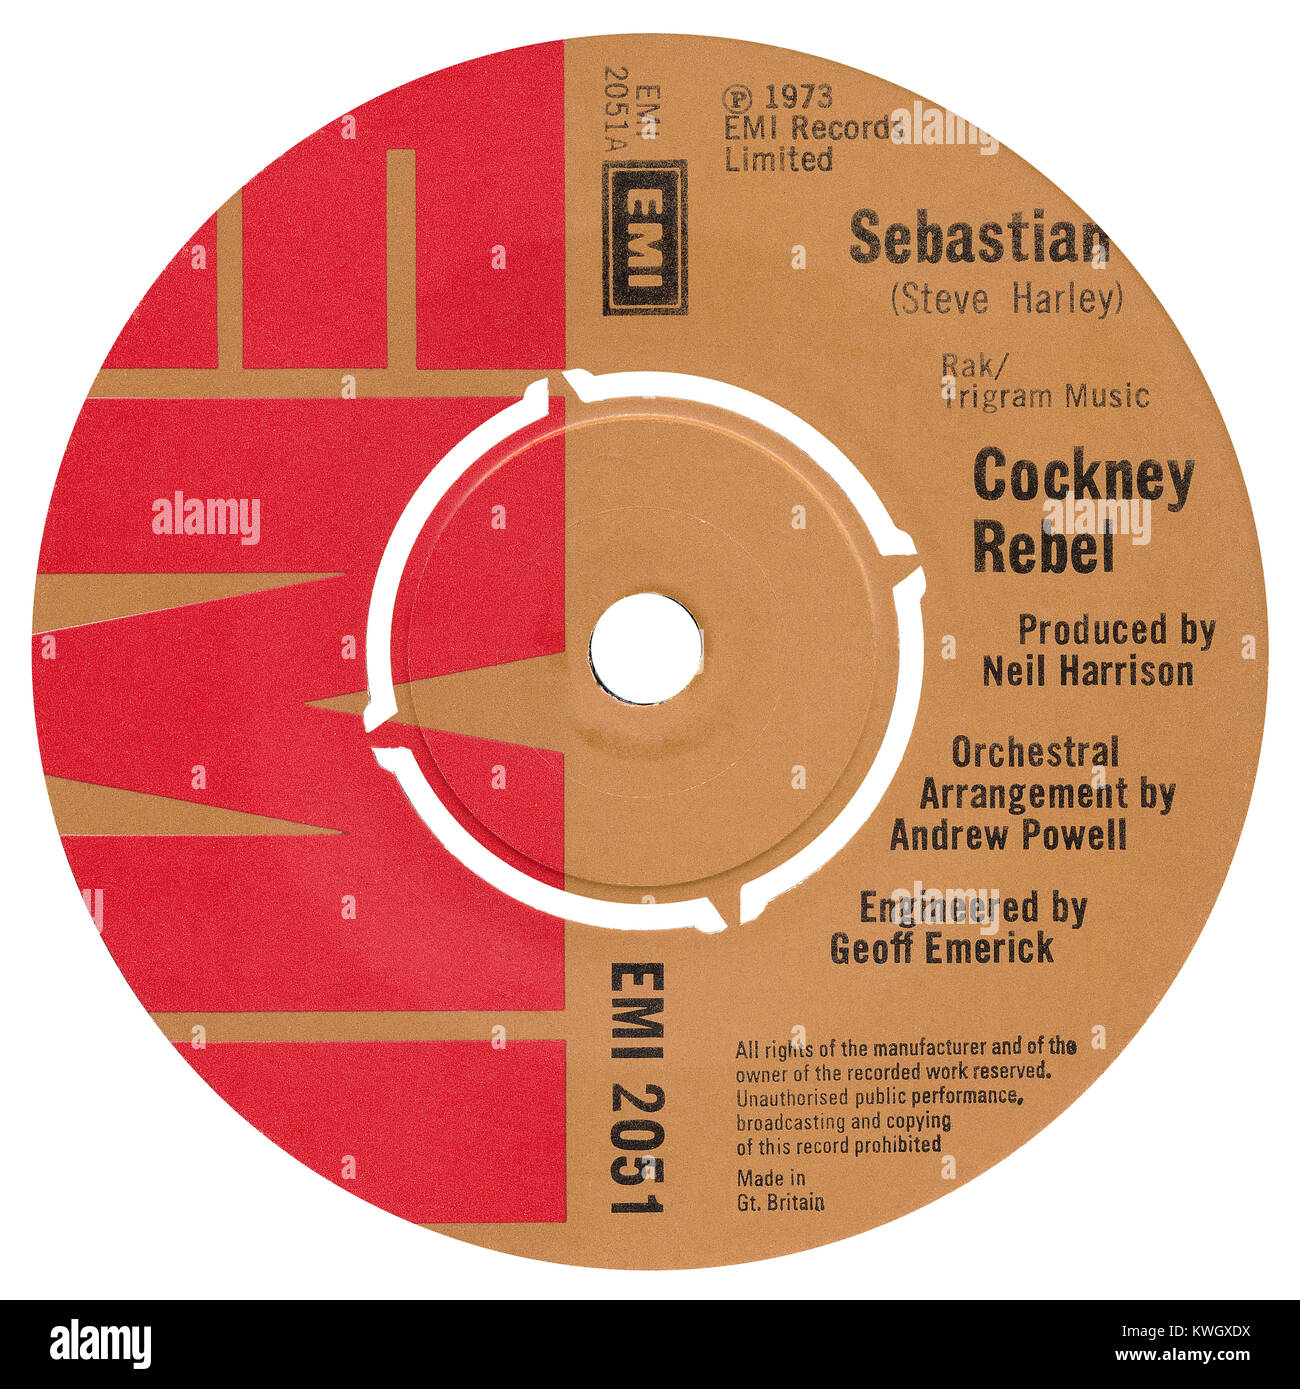 45 RPM 7' UK record label of Sebastian by Cockney Rebel. Written by Steve Harley, arranged by Andrew Powell and produced by Neil Harrison. Released in August 1973 on EMI Records. Stock Photo